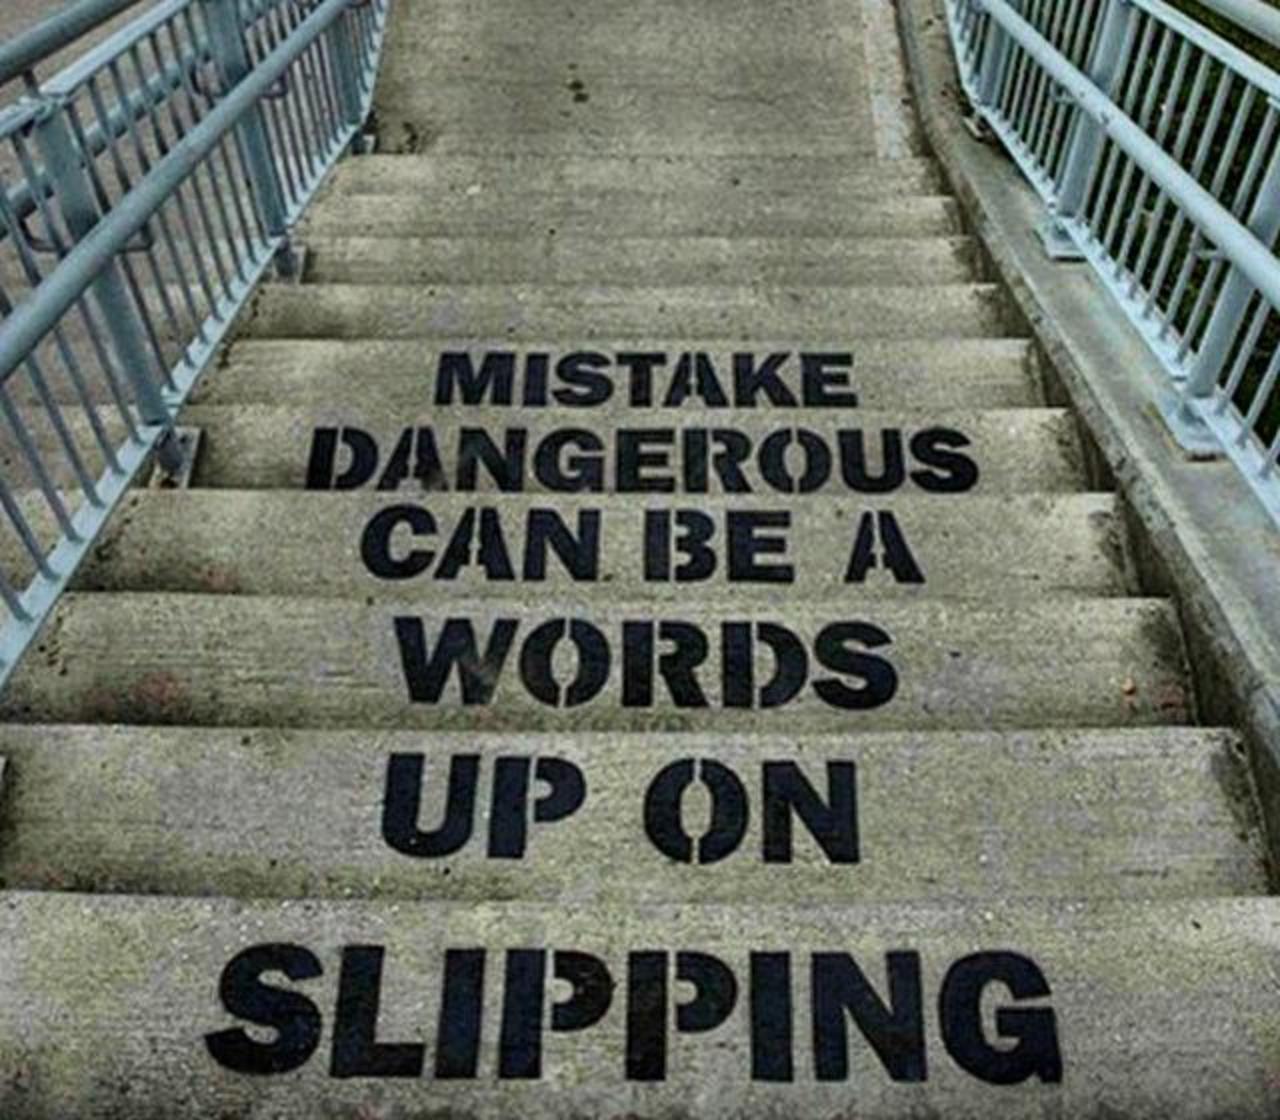 Slipping up on words can be a dangerous mistake 

Street Art by m.obstr 

#art #arte #graffiti #streetart http://t.co/puAhqyS2f2